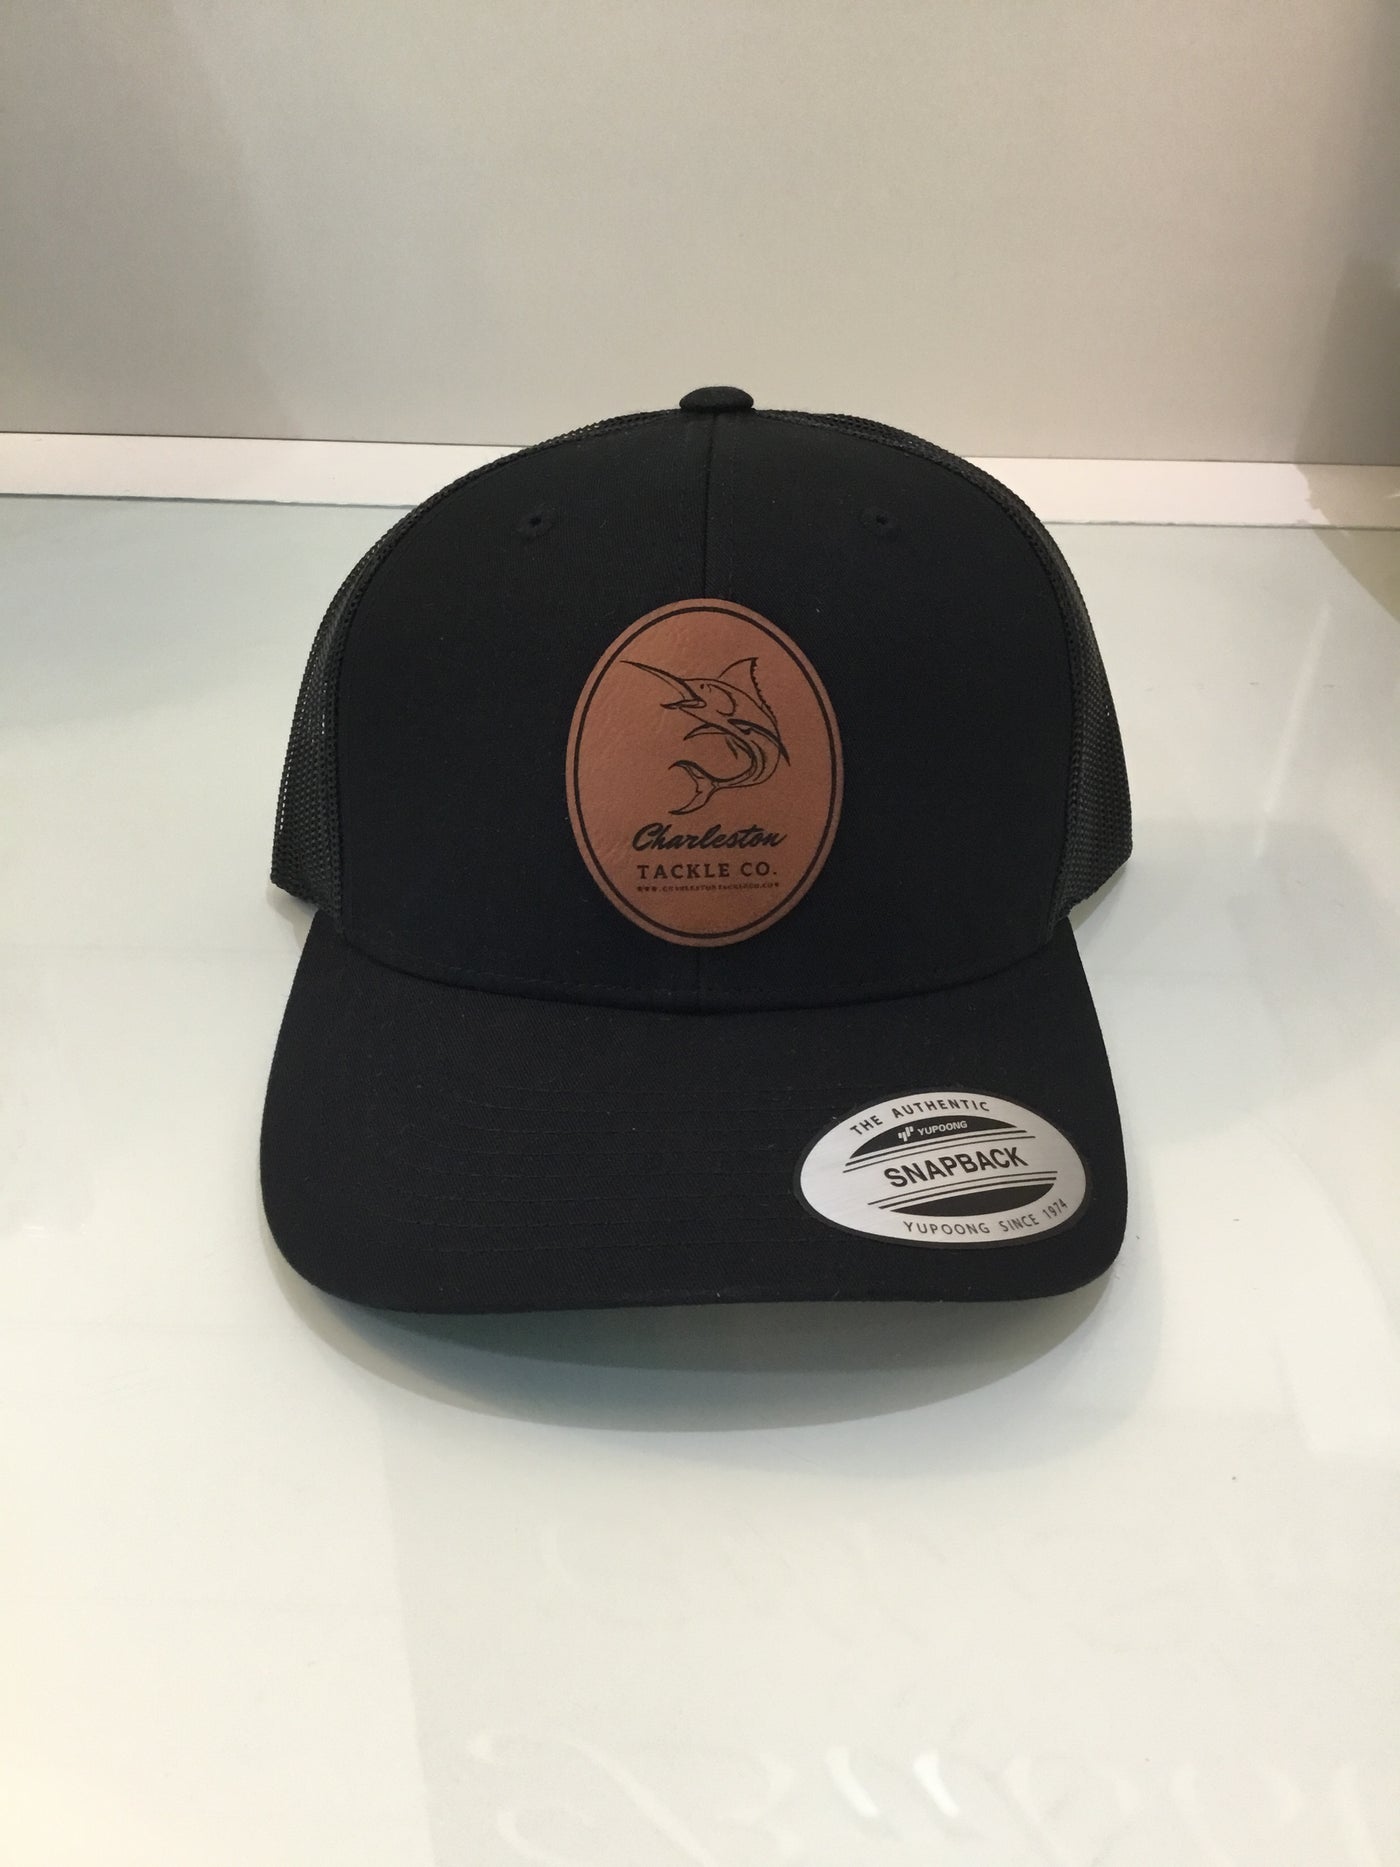 Charleston Tackle Co Leather Patch Logo Trucker Snapback Hat